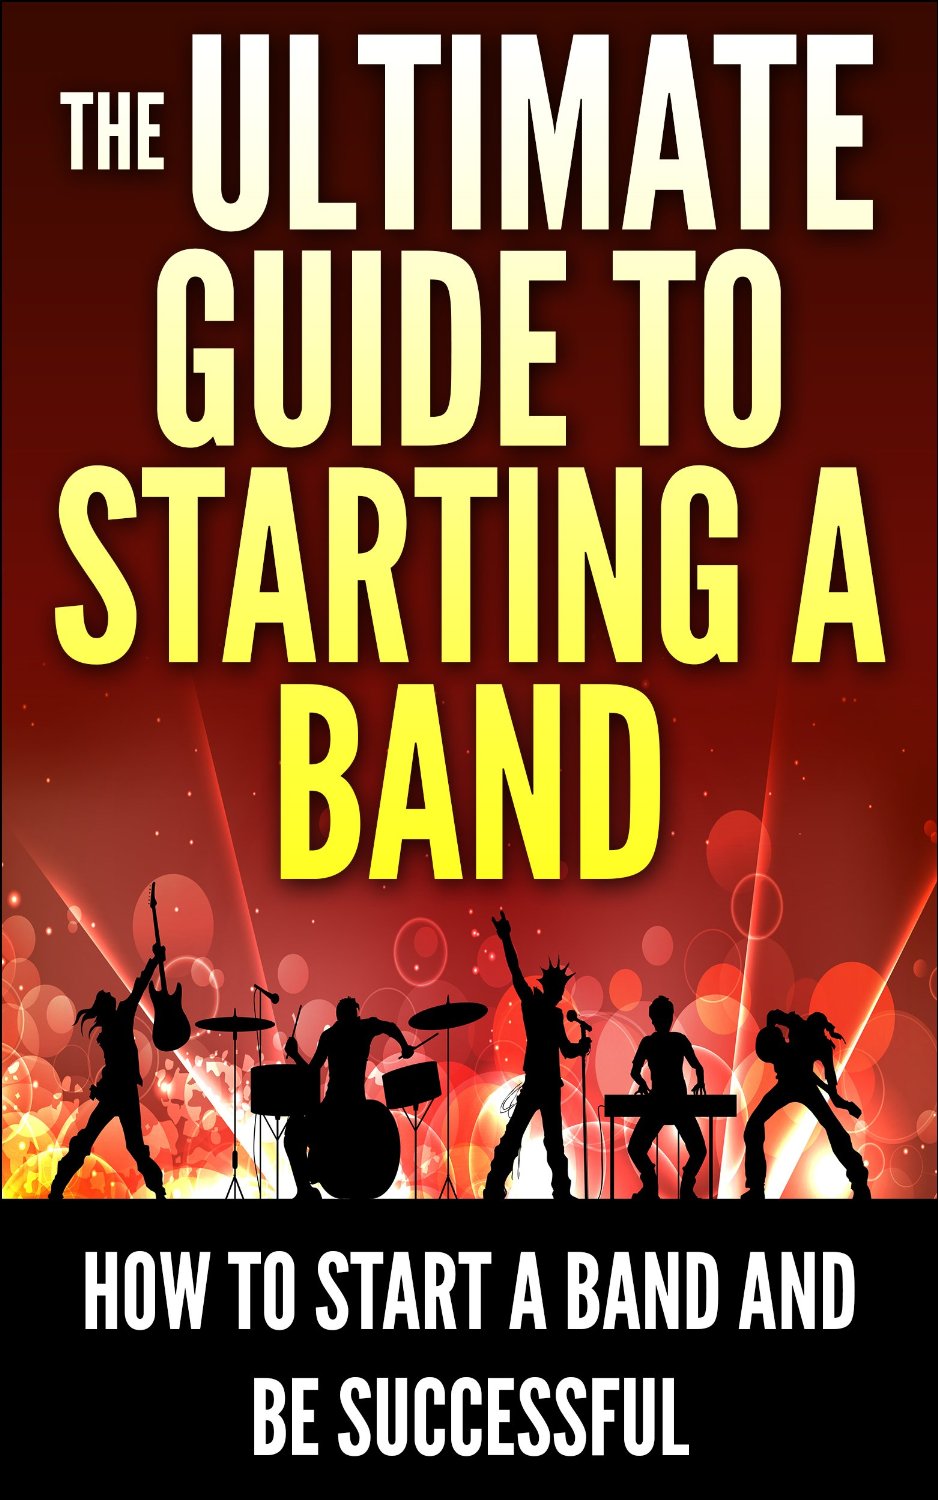 The Ultimate Guide To Starting A Band: How To Start A Band And Be Successful  by George K.